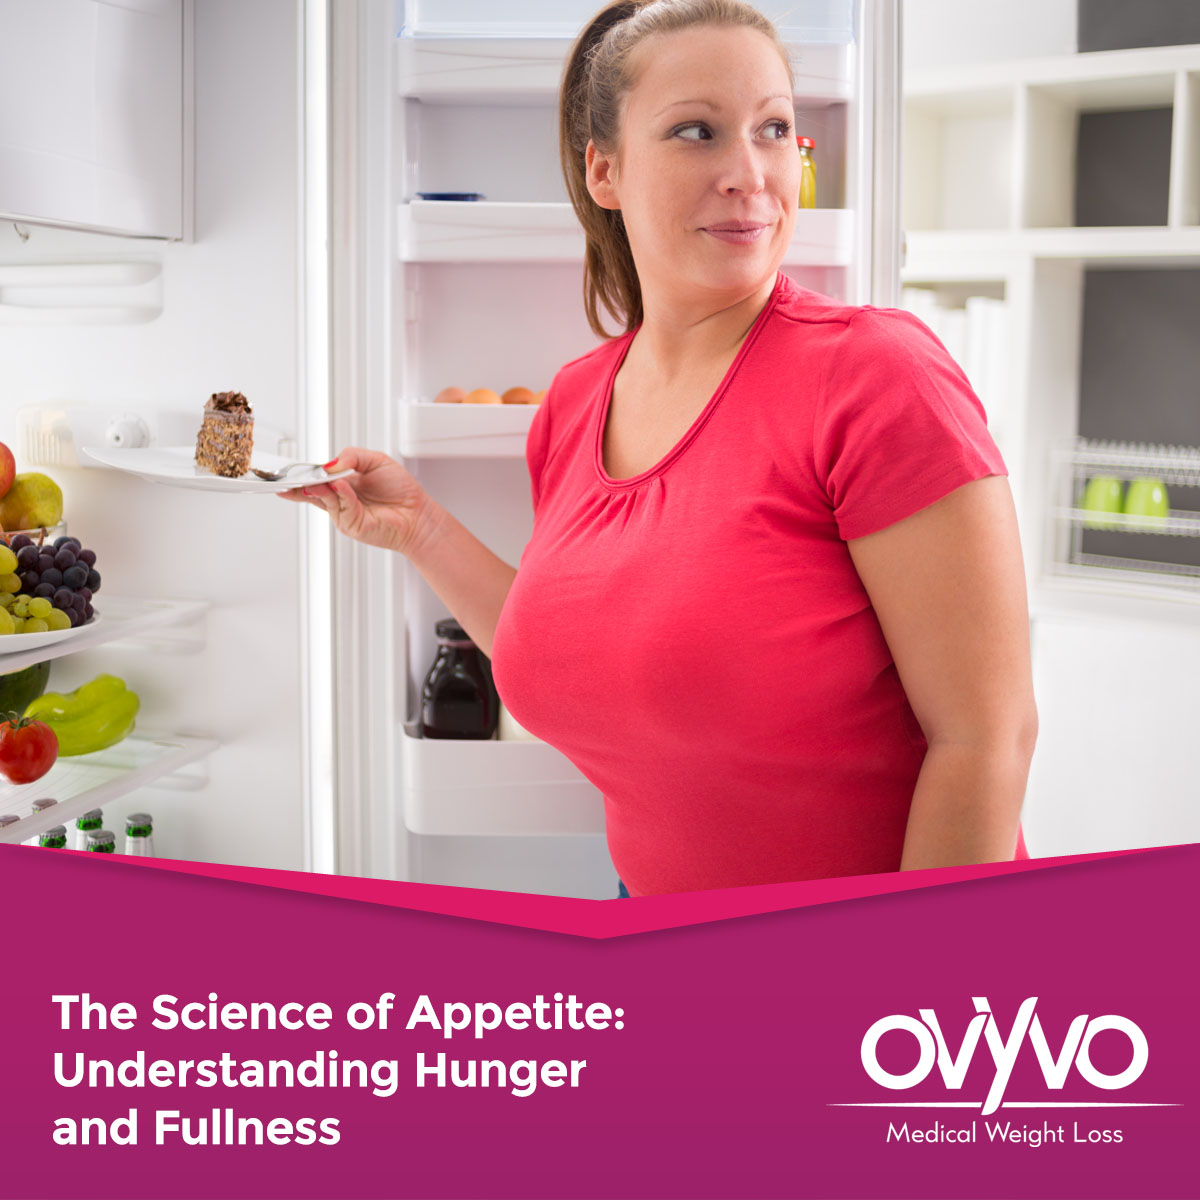 The Science of Appetite: Understanding Hunger and Fullness